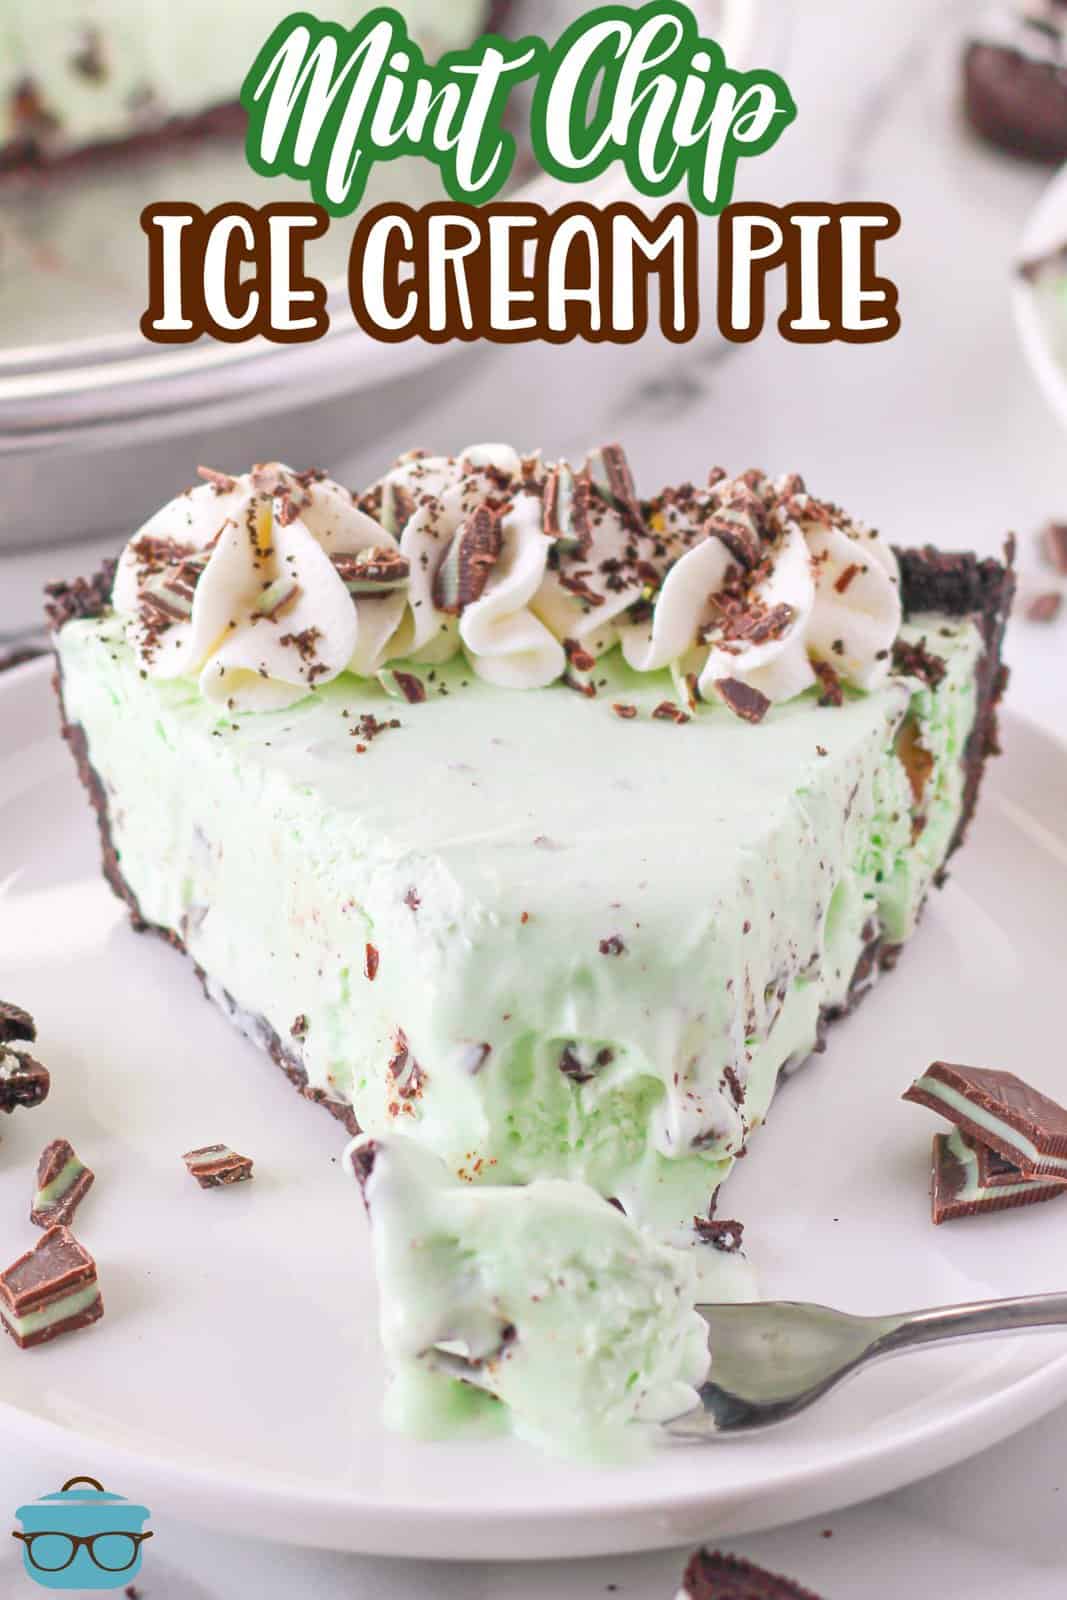 Pinterest image of Mint Chip Ice Cream Pie on white plate with bite taken out of it.